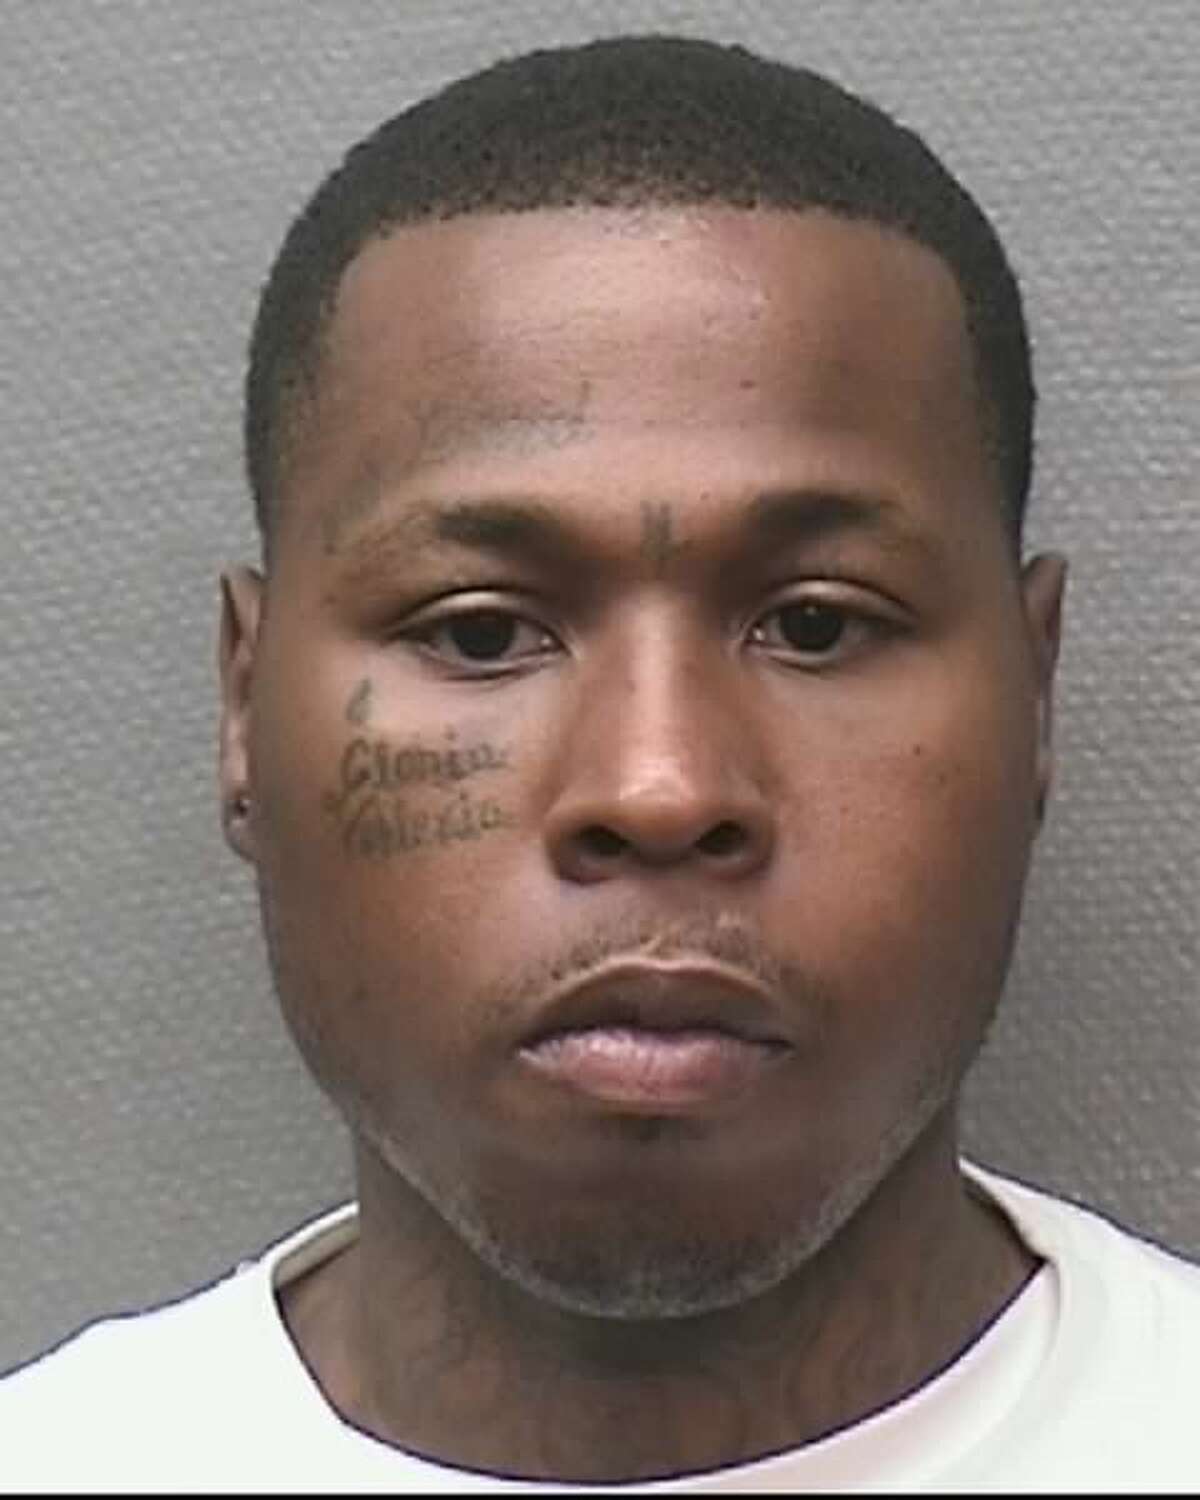 Paul Wilson, 28, was arrested during a warrant roundup April 10-13, 2017, in connection with an alleged crime against children. The initiative was conducted by the Harris County Sheriff's Office Criminal Warrants Division and the Texas Attorney General's Office.  